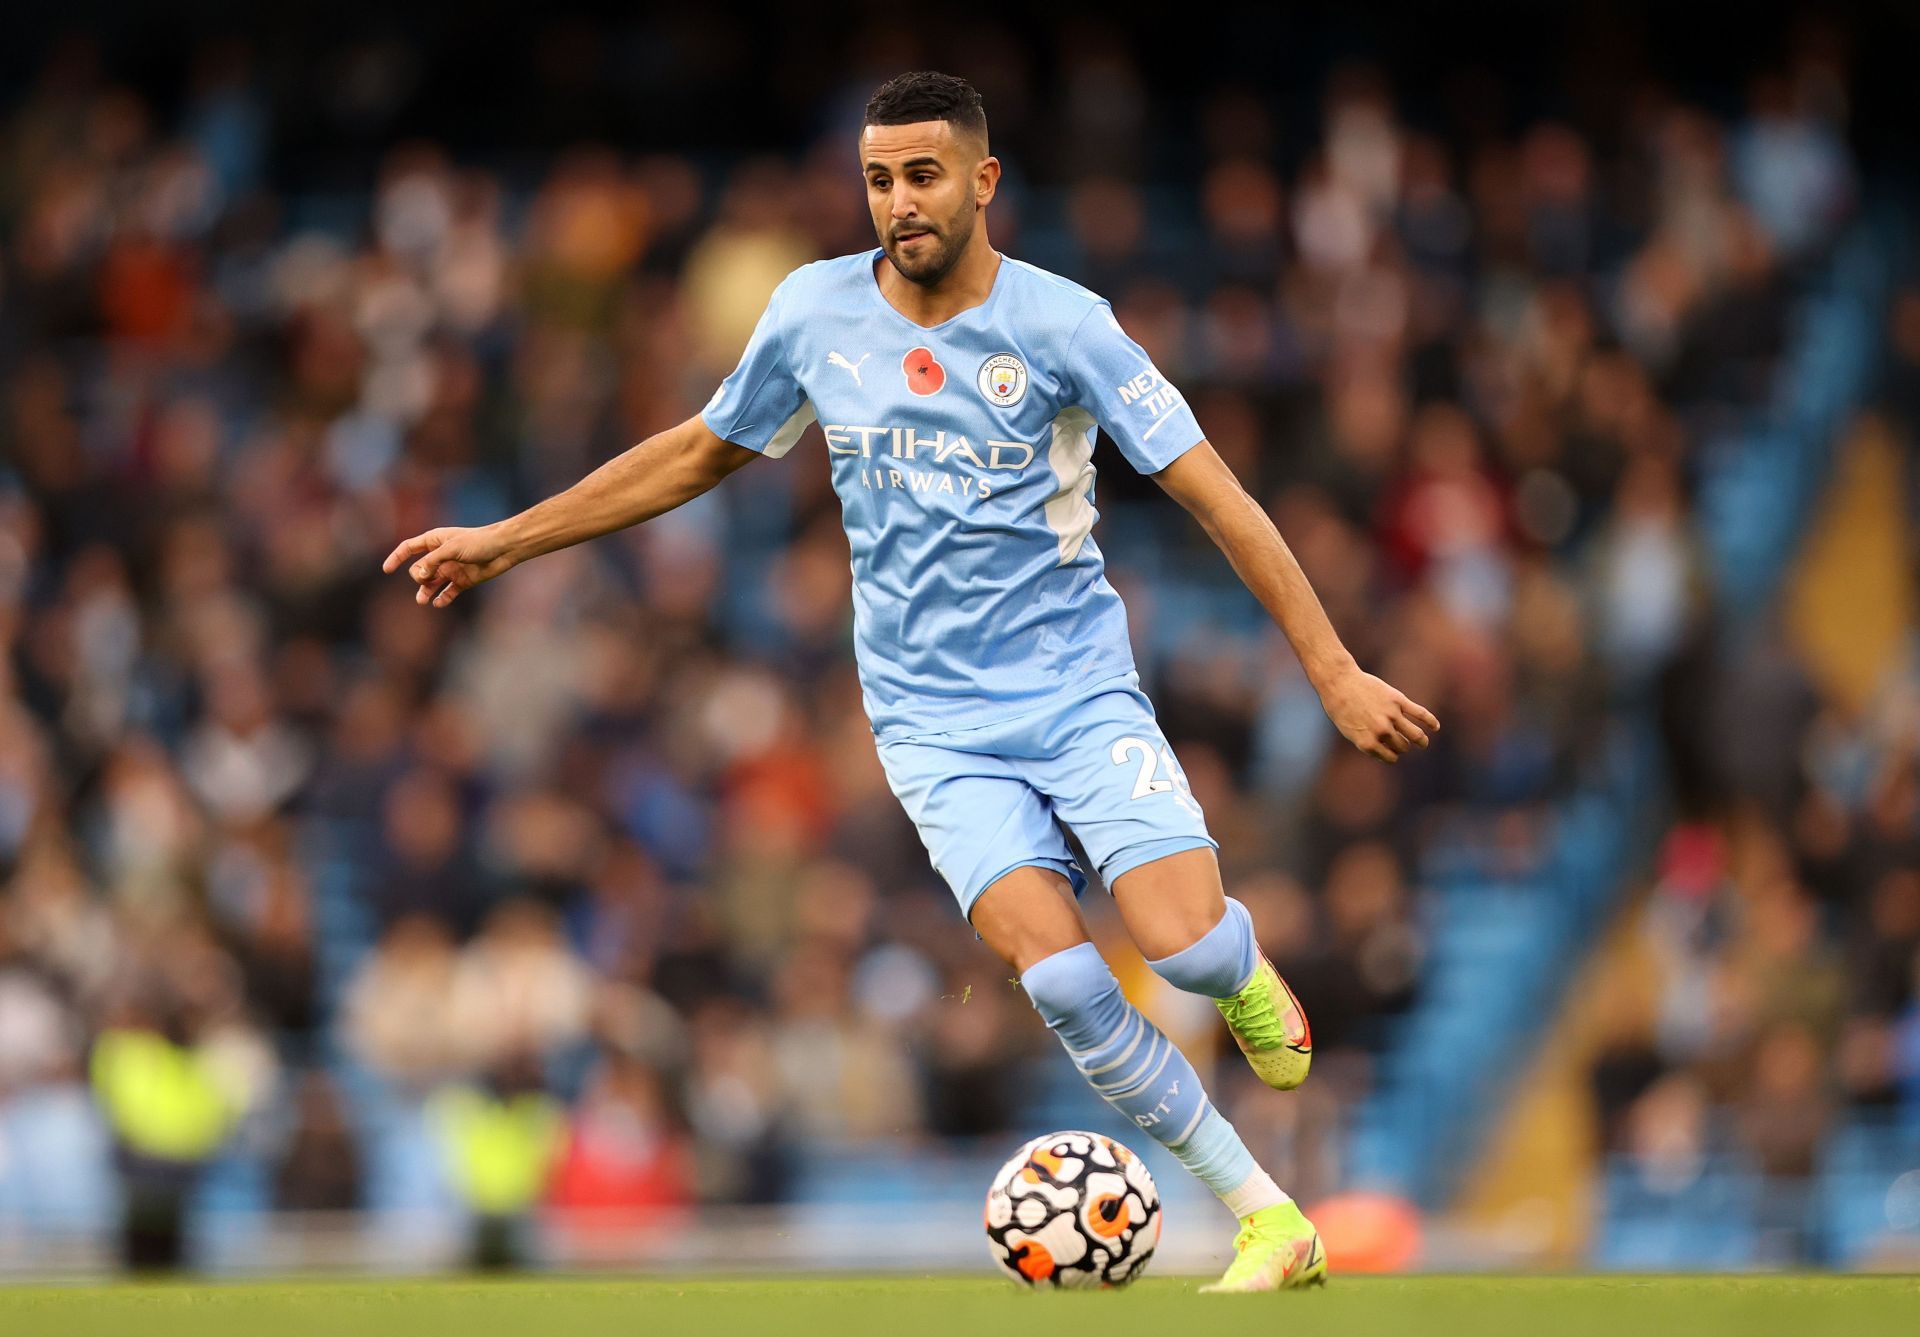 Mahrez has seen limited action for Manchester City in the Premier League so far